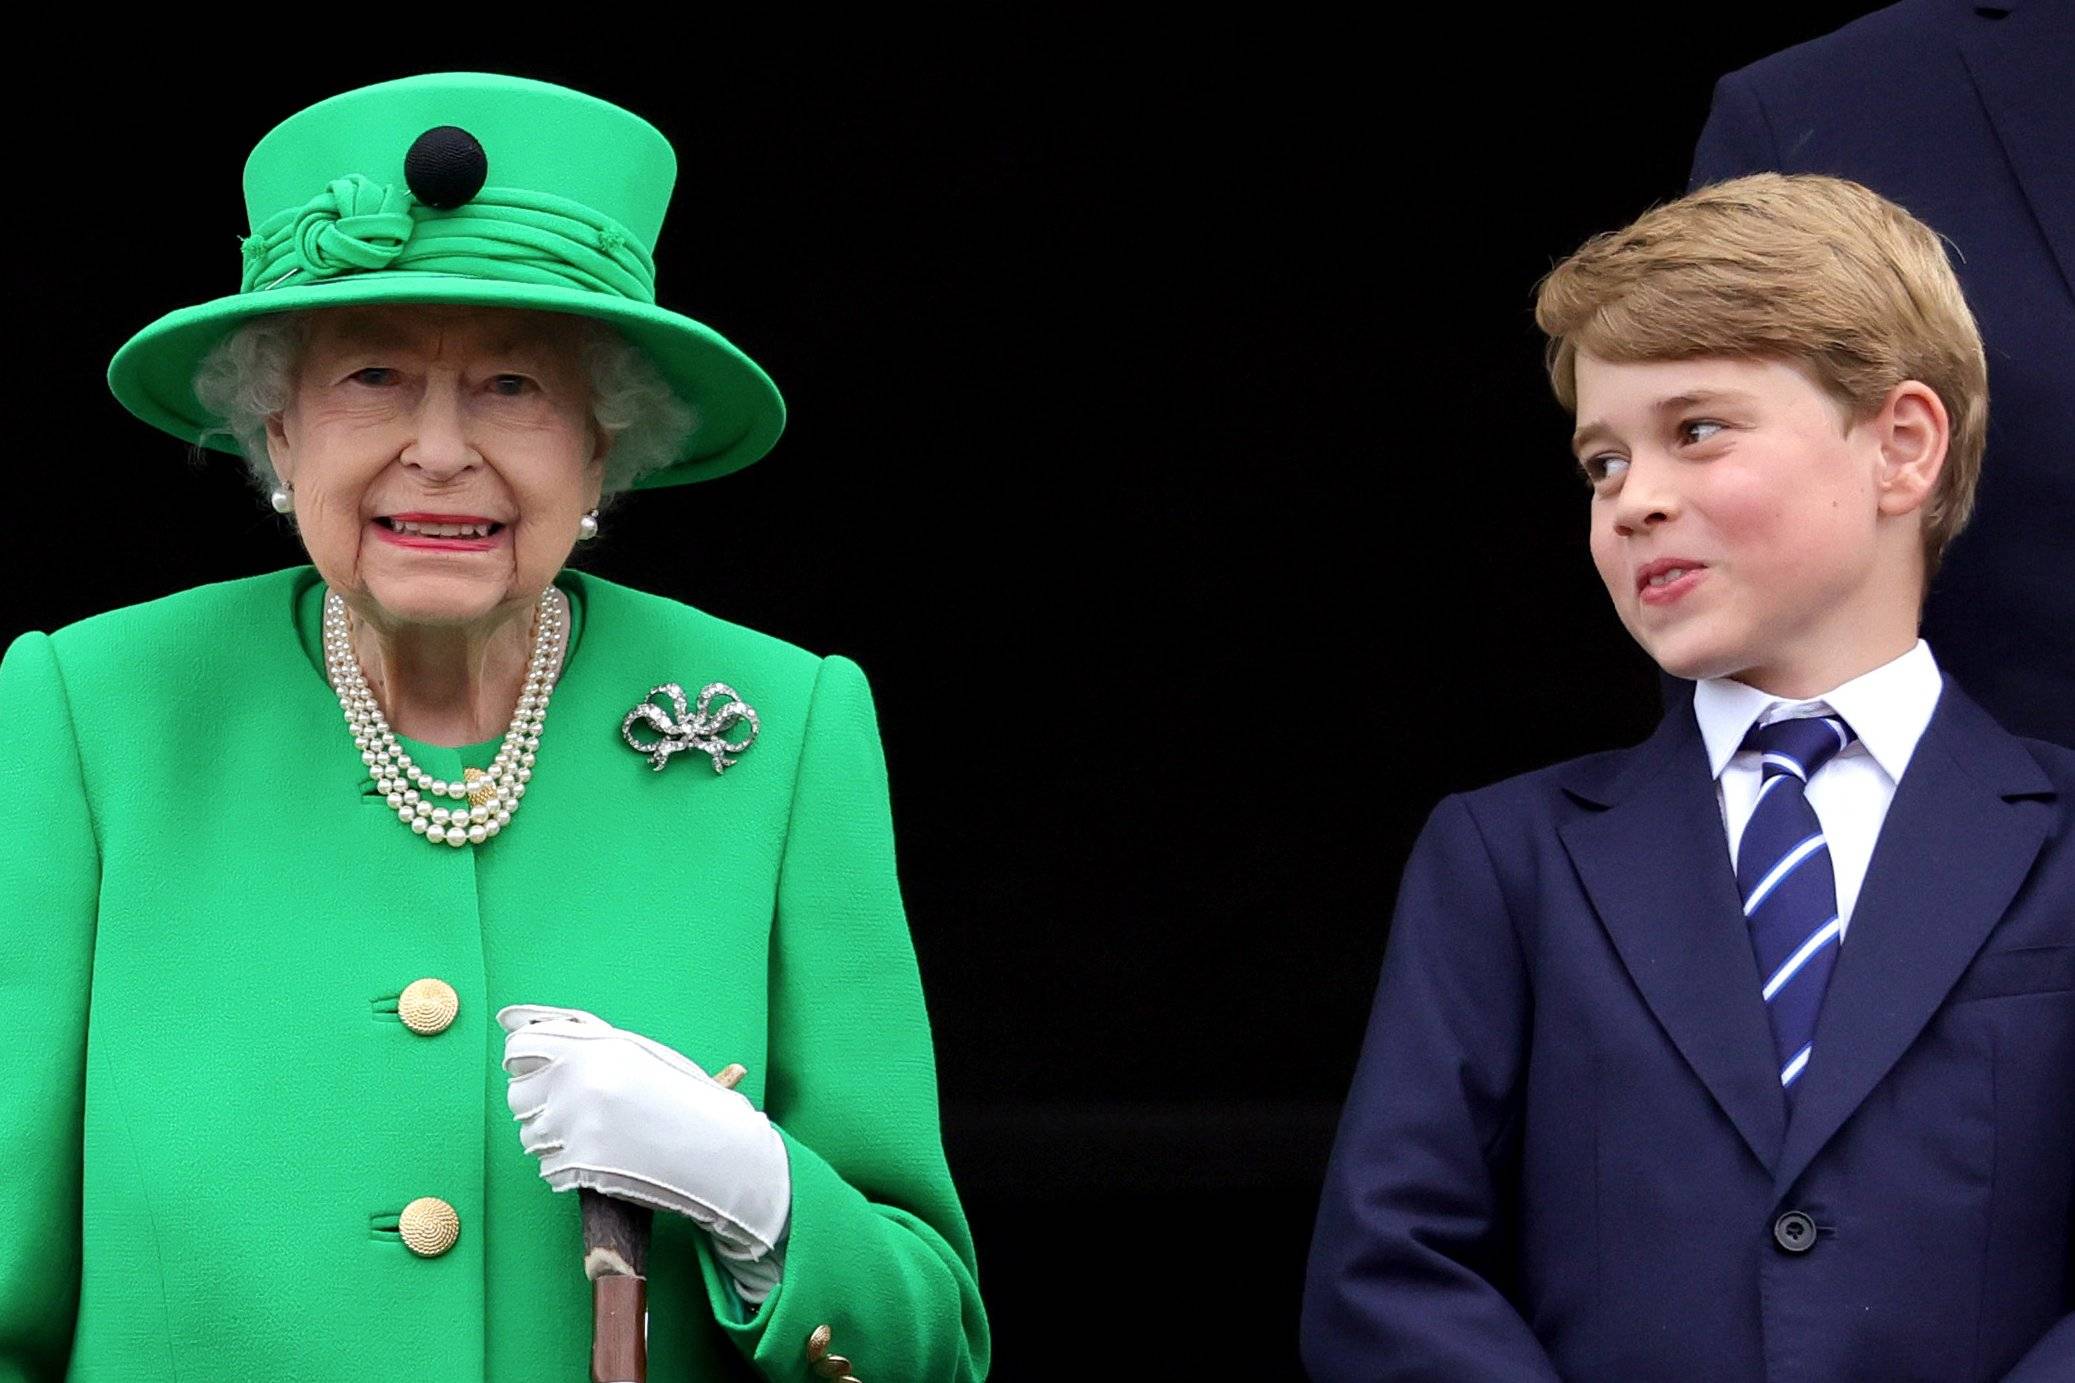 (FILES) In this file photo taken on June 5, 2022 Britain's Prince George of Cambridge (R) looks at his great grandmother Britain's Queen Elizabeth II (L) acknowledging the crowd from the balcony of Buckingham Palace at the end of the Platinum Pageant in London. - Queen Elizabeth II, the longest-serving monarch in British history and an icon instantly recognisable to billions of people around the world, has died aged 96, Buckingham Palace said on Thursday, September 8, 2022.  Her eldest son, Charles, 73, succeeds as king immediately, according to centuries of protocol, beginning a new, less certain chapter for the royal family after the queen's record-breaking 70-year reign. (Photo by Chris Jackson / POOL / AFP)